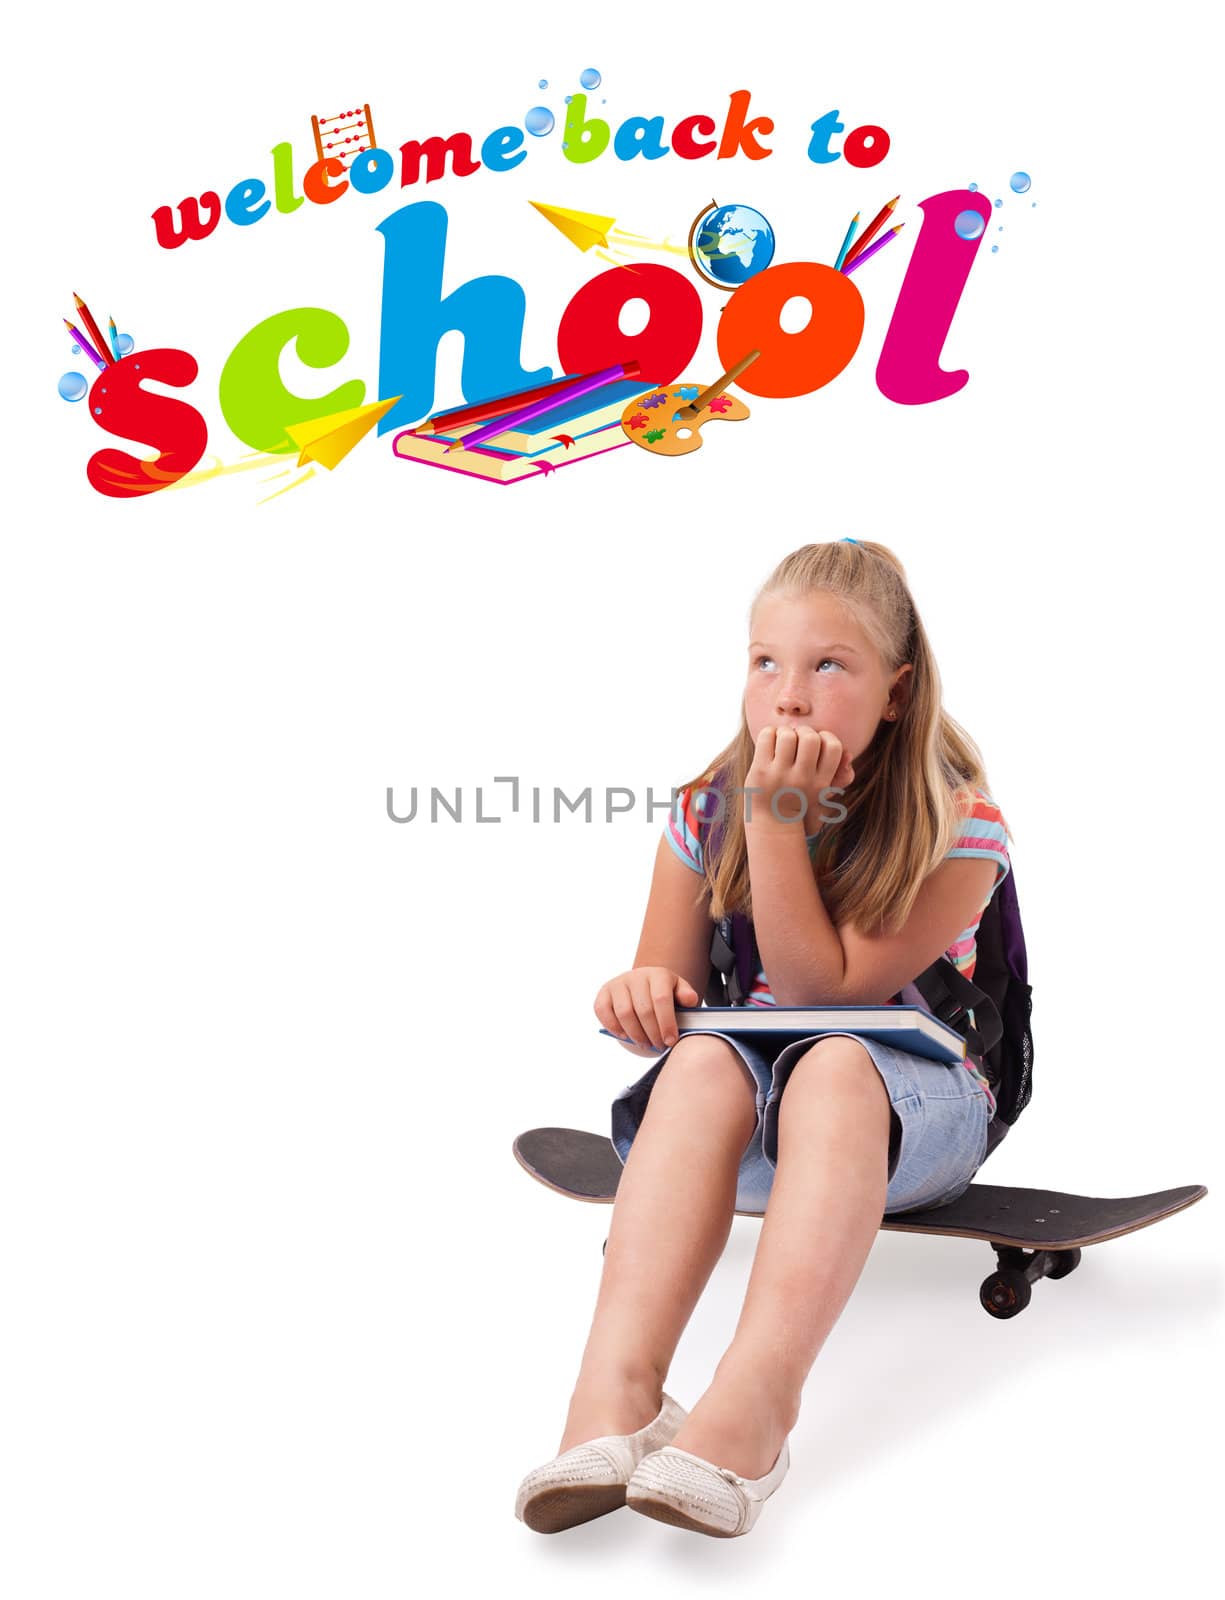 Kid on skateboard with back to school theme isolated on white